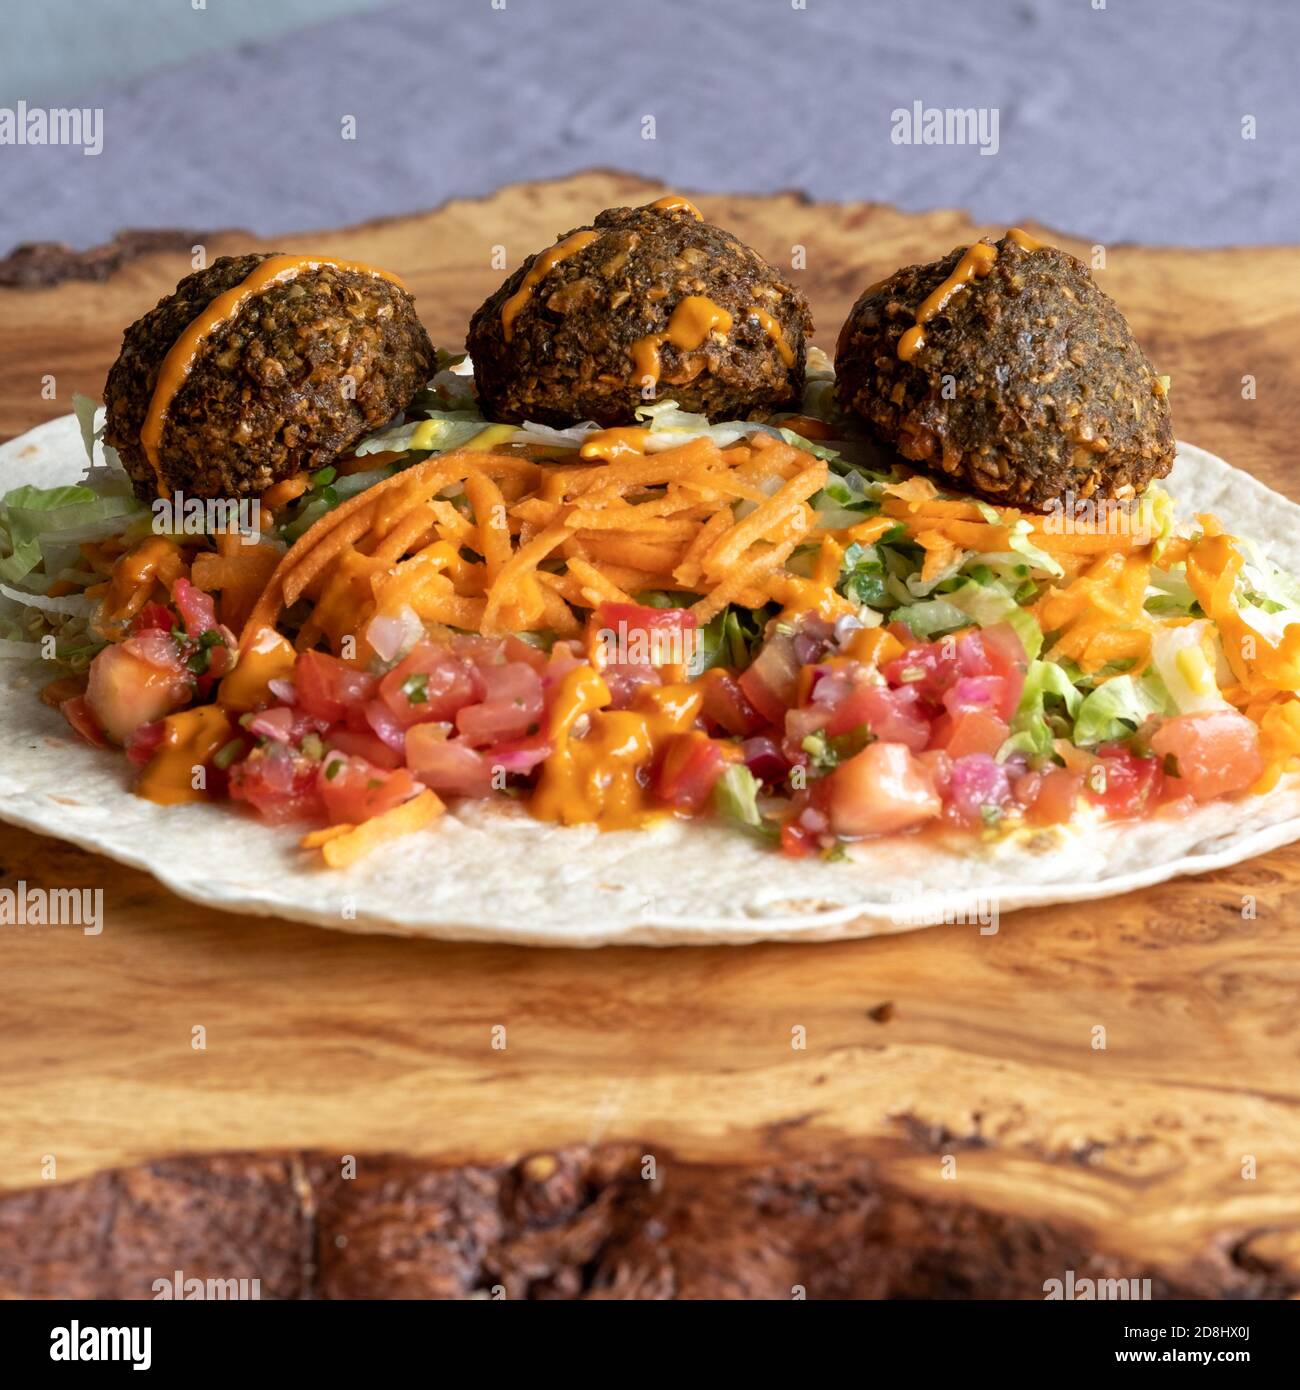 Fried falafal balls with colourful salad in a wrap, with sauce over. Stock Photo